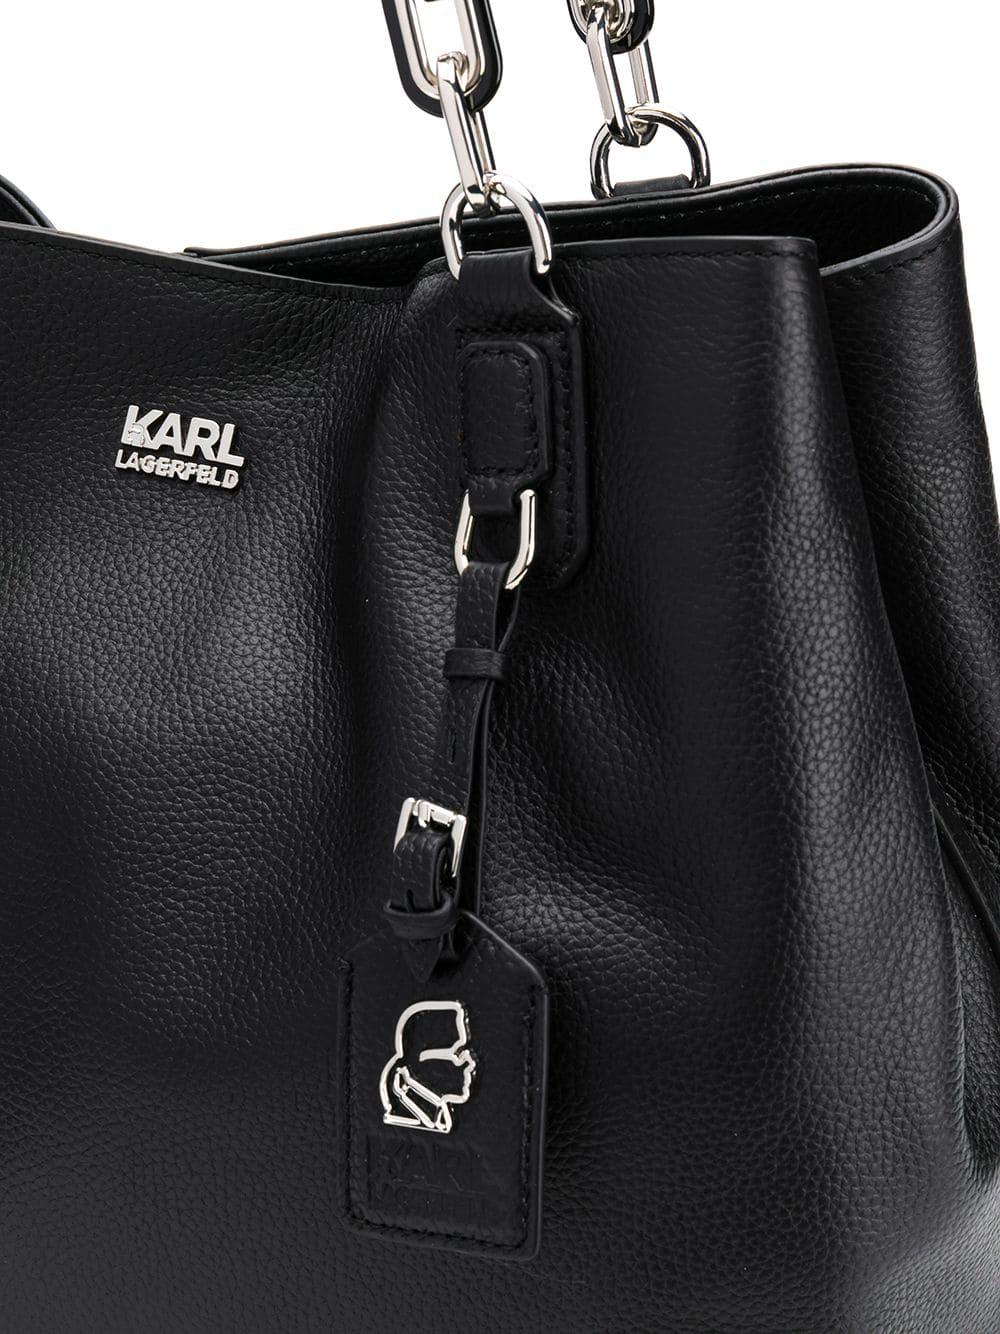 Karl Lagerfeld Backpack Purse | Literacy Ontario Central South